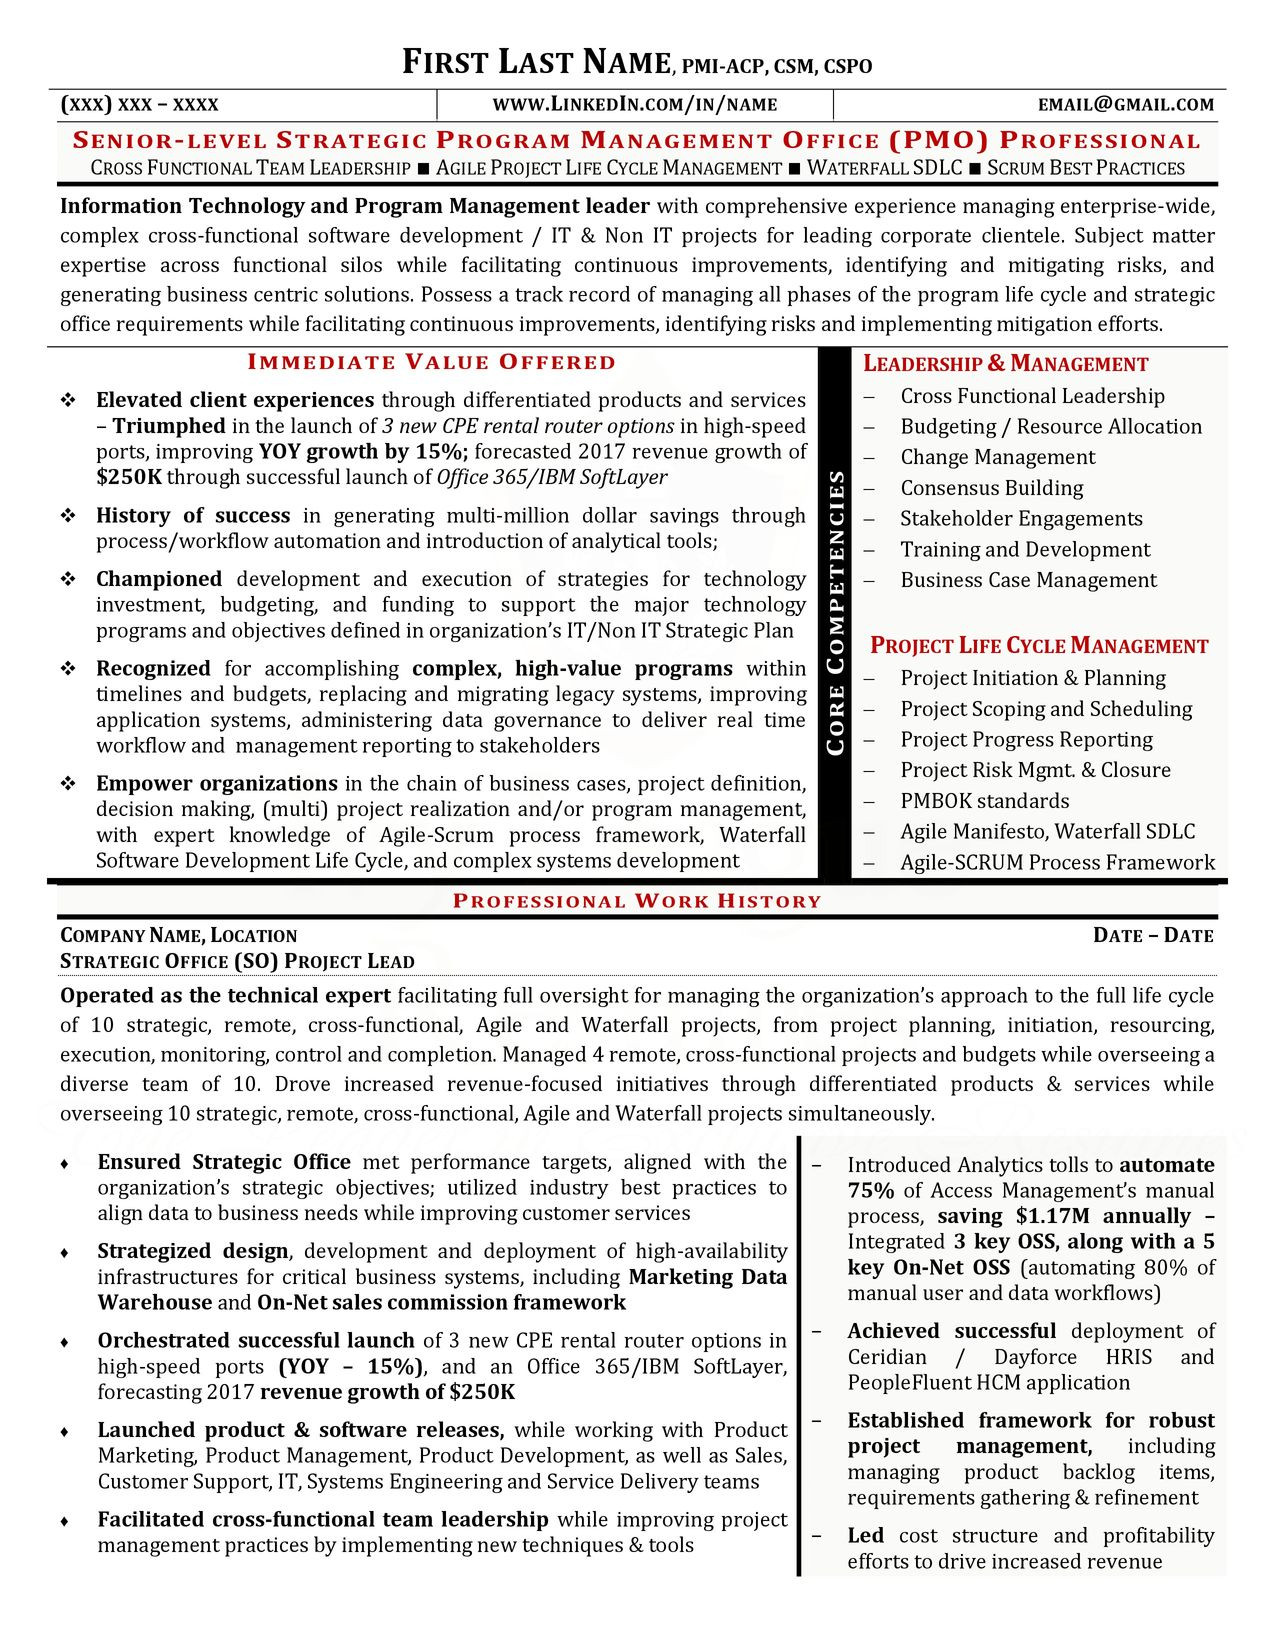 Sample College Application Resume Ivy League Sample Resumes – Ivy League Resumes